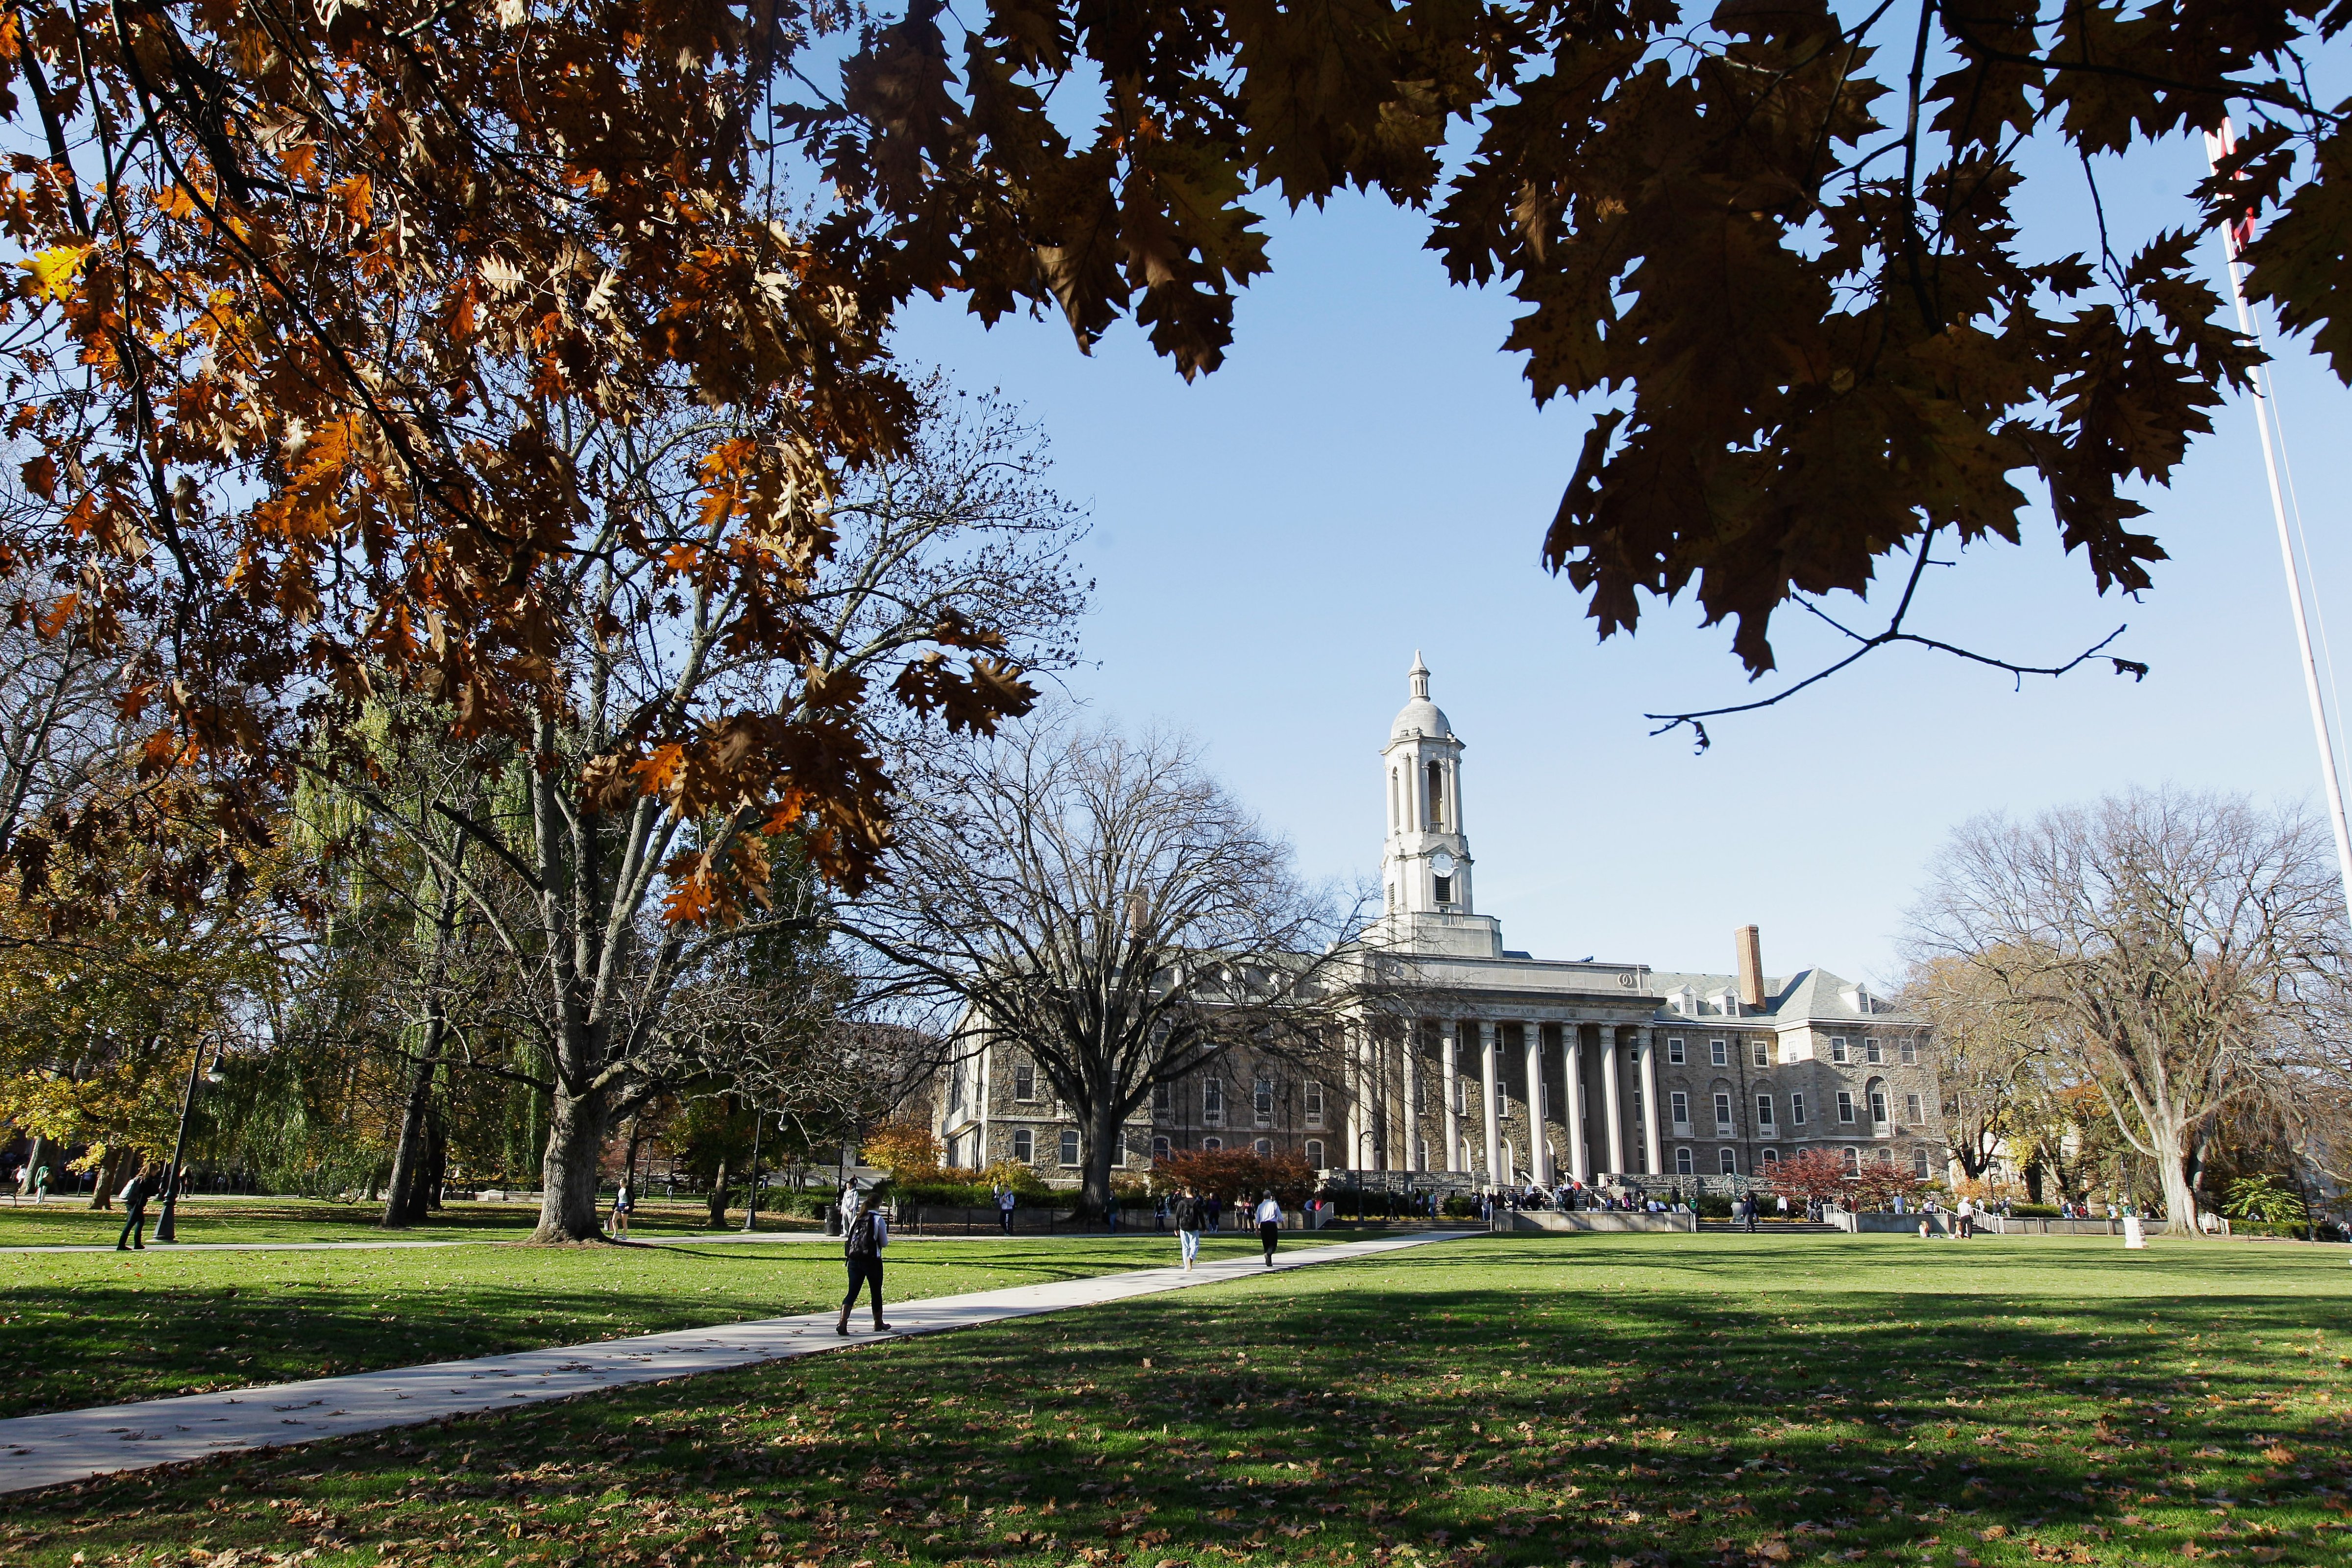 The Penn State University campus pictured on Nov.  8, 2011 in University Park, Pennsylvania. (Rob Carr/Getty Images)